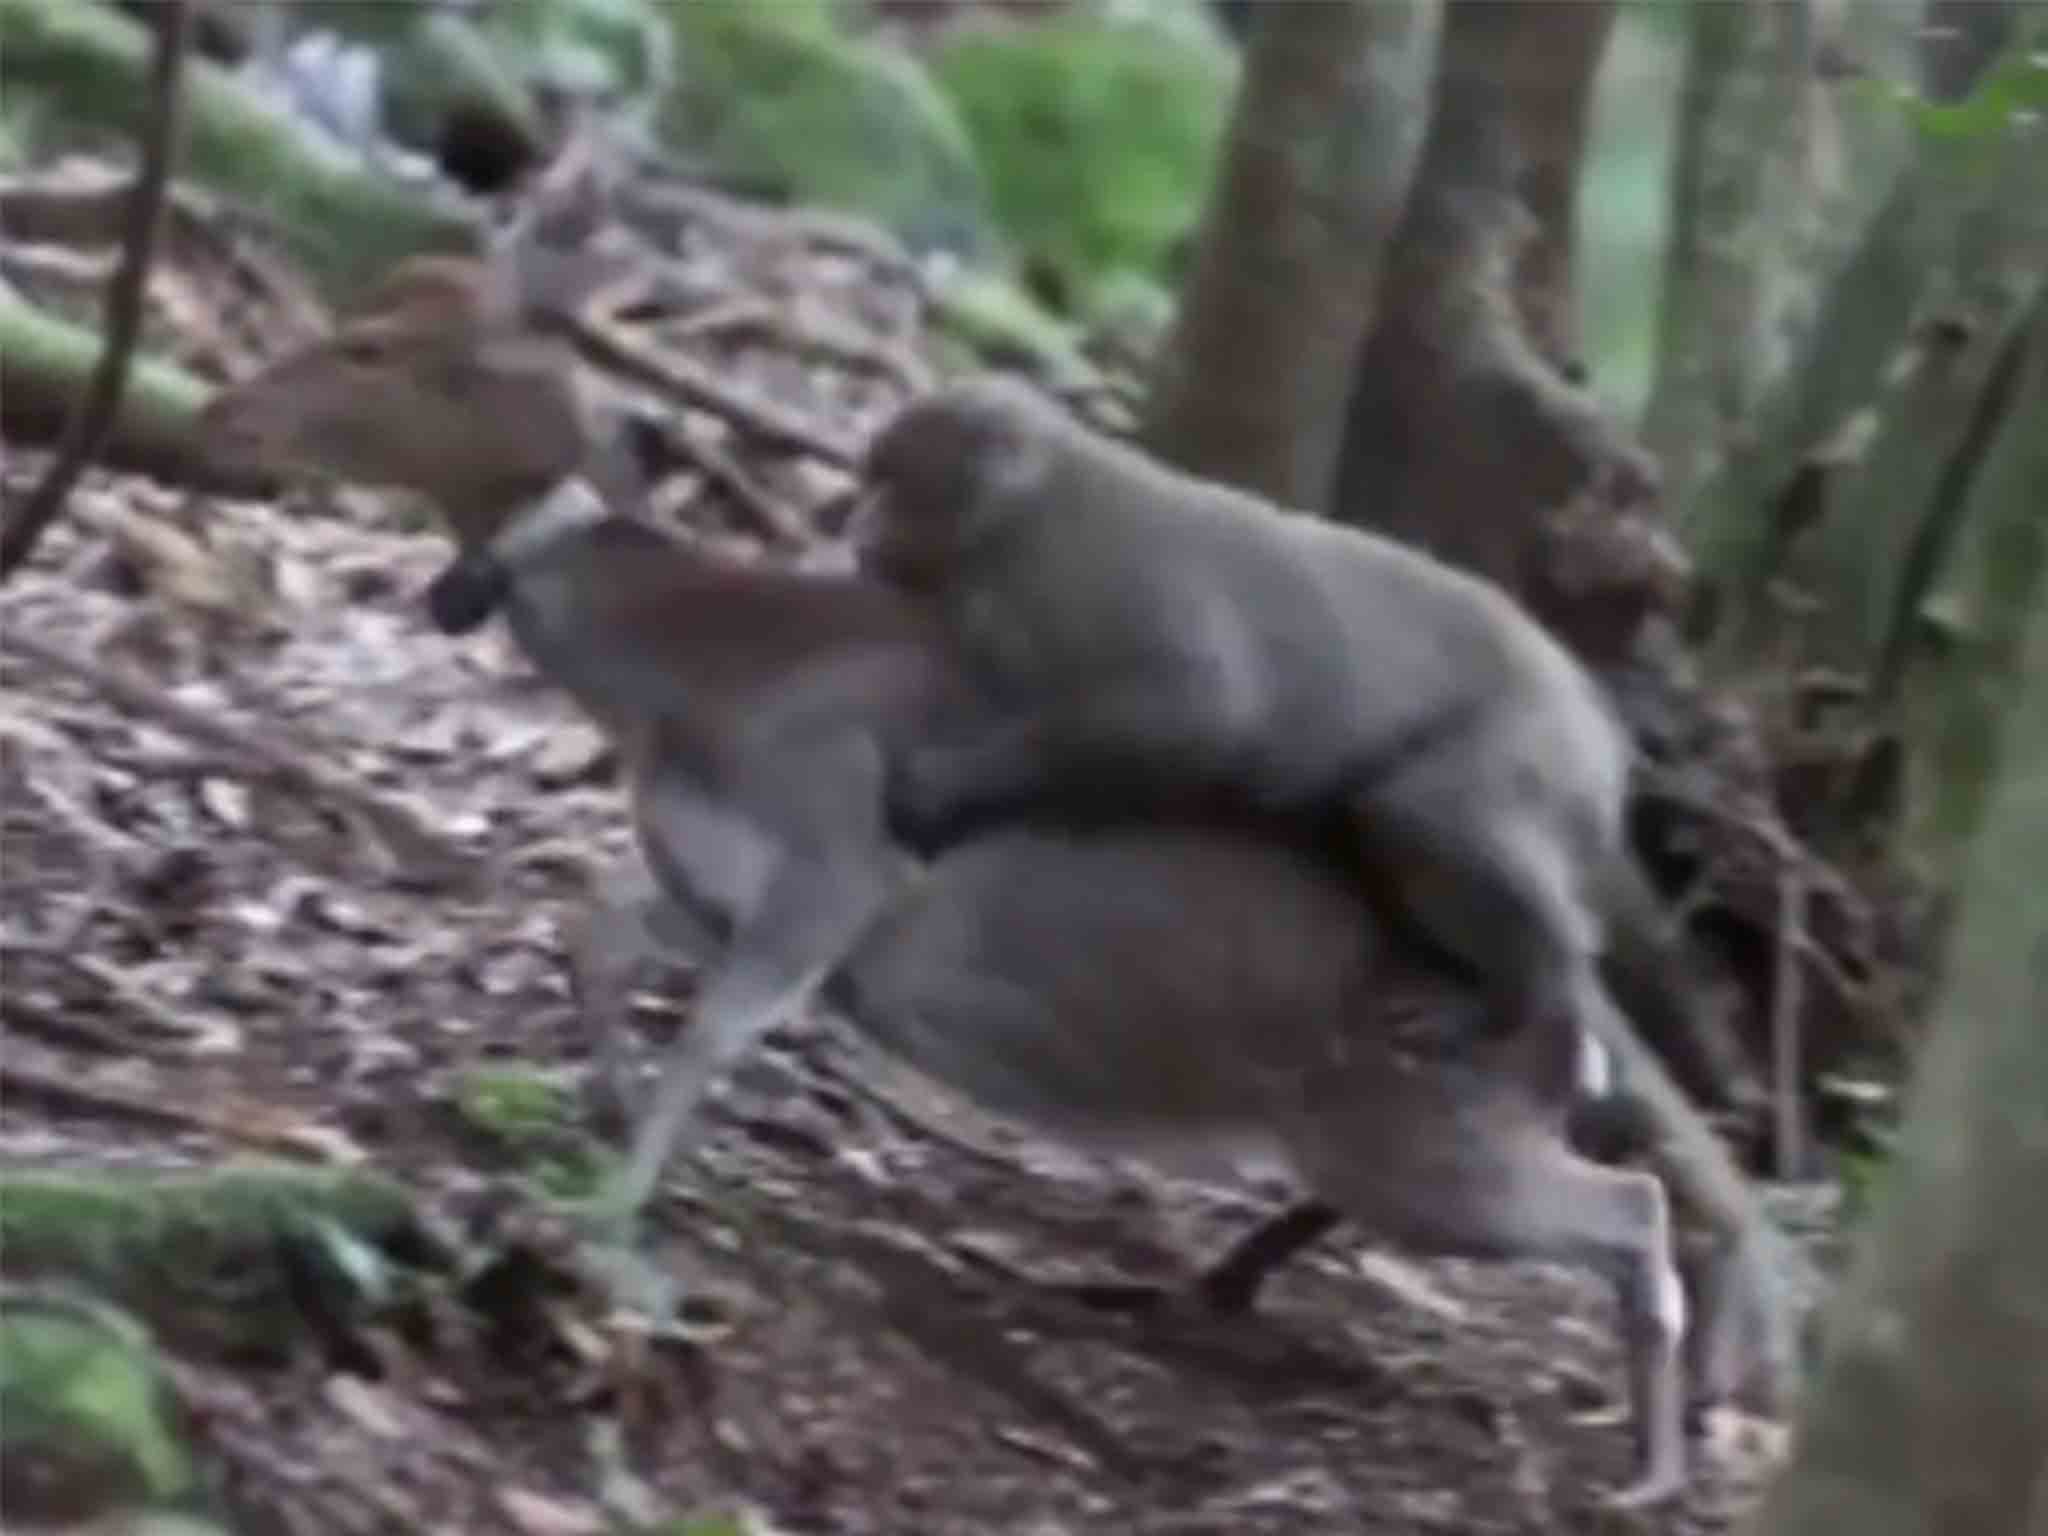 Japani Horse Sex Dilet - Sex between monkey and deer may be a new 'behavioural tradition ...